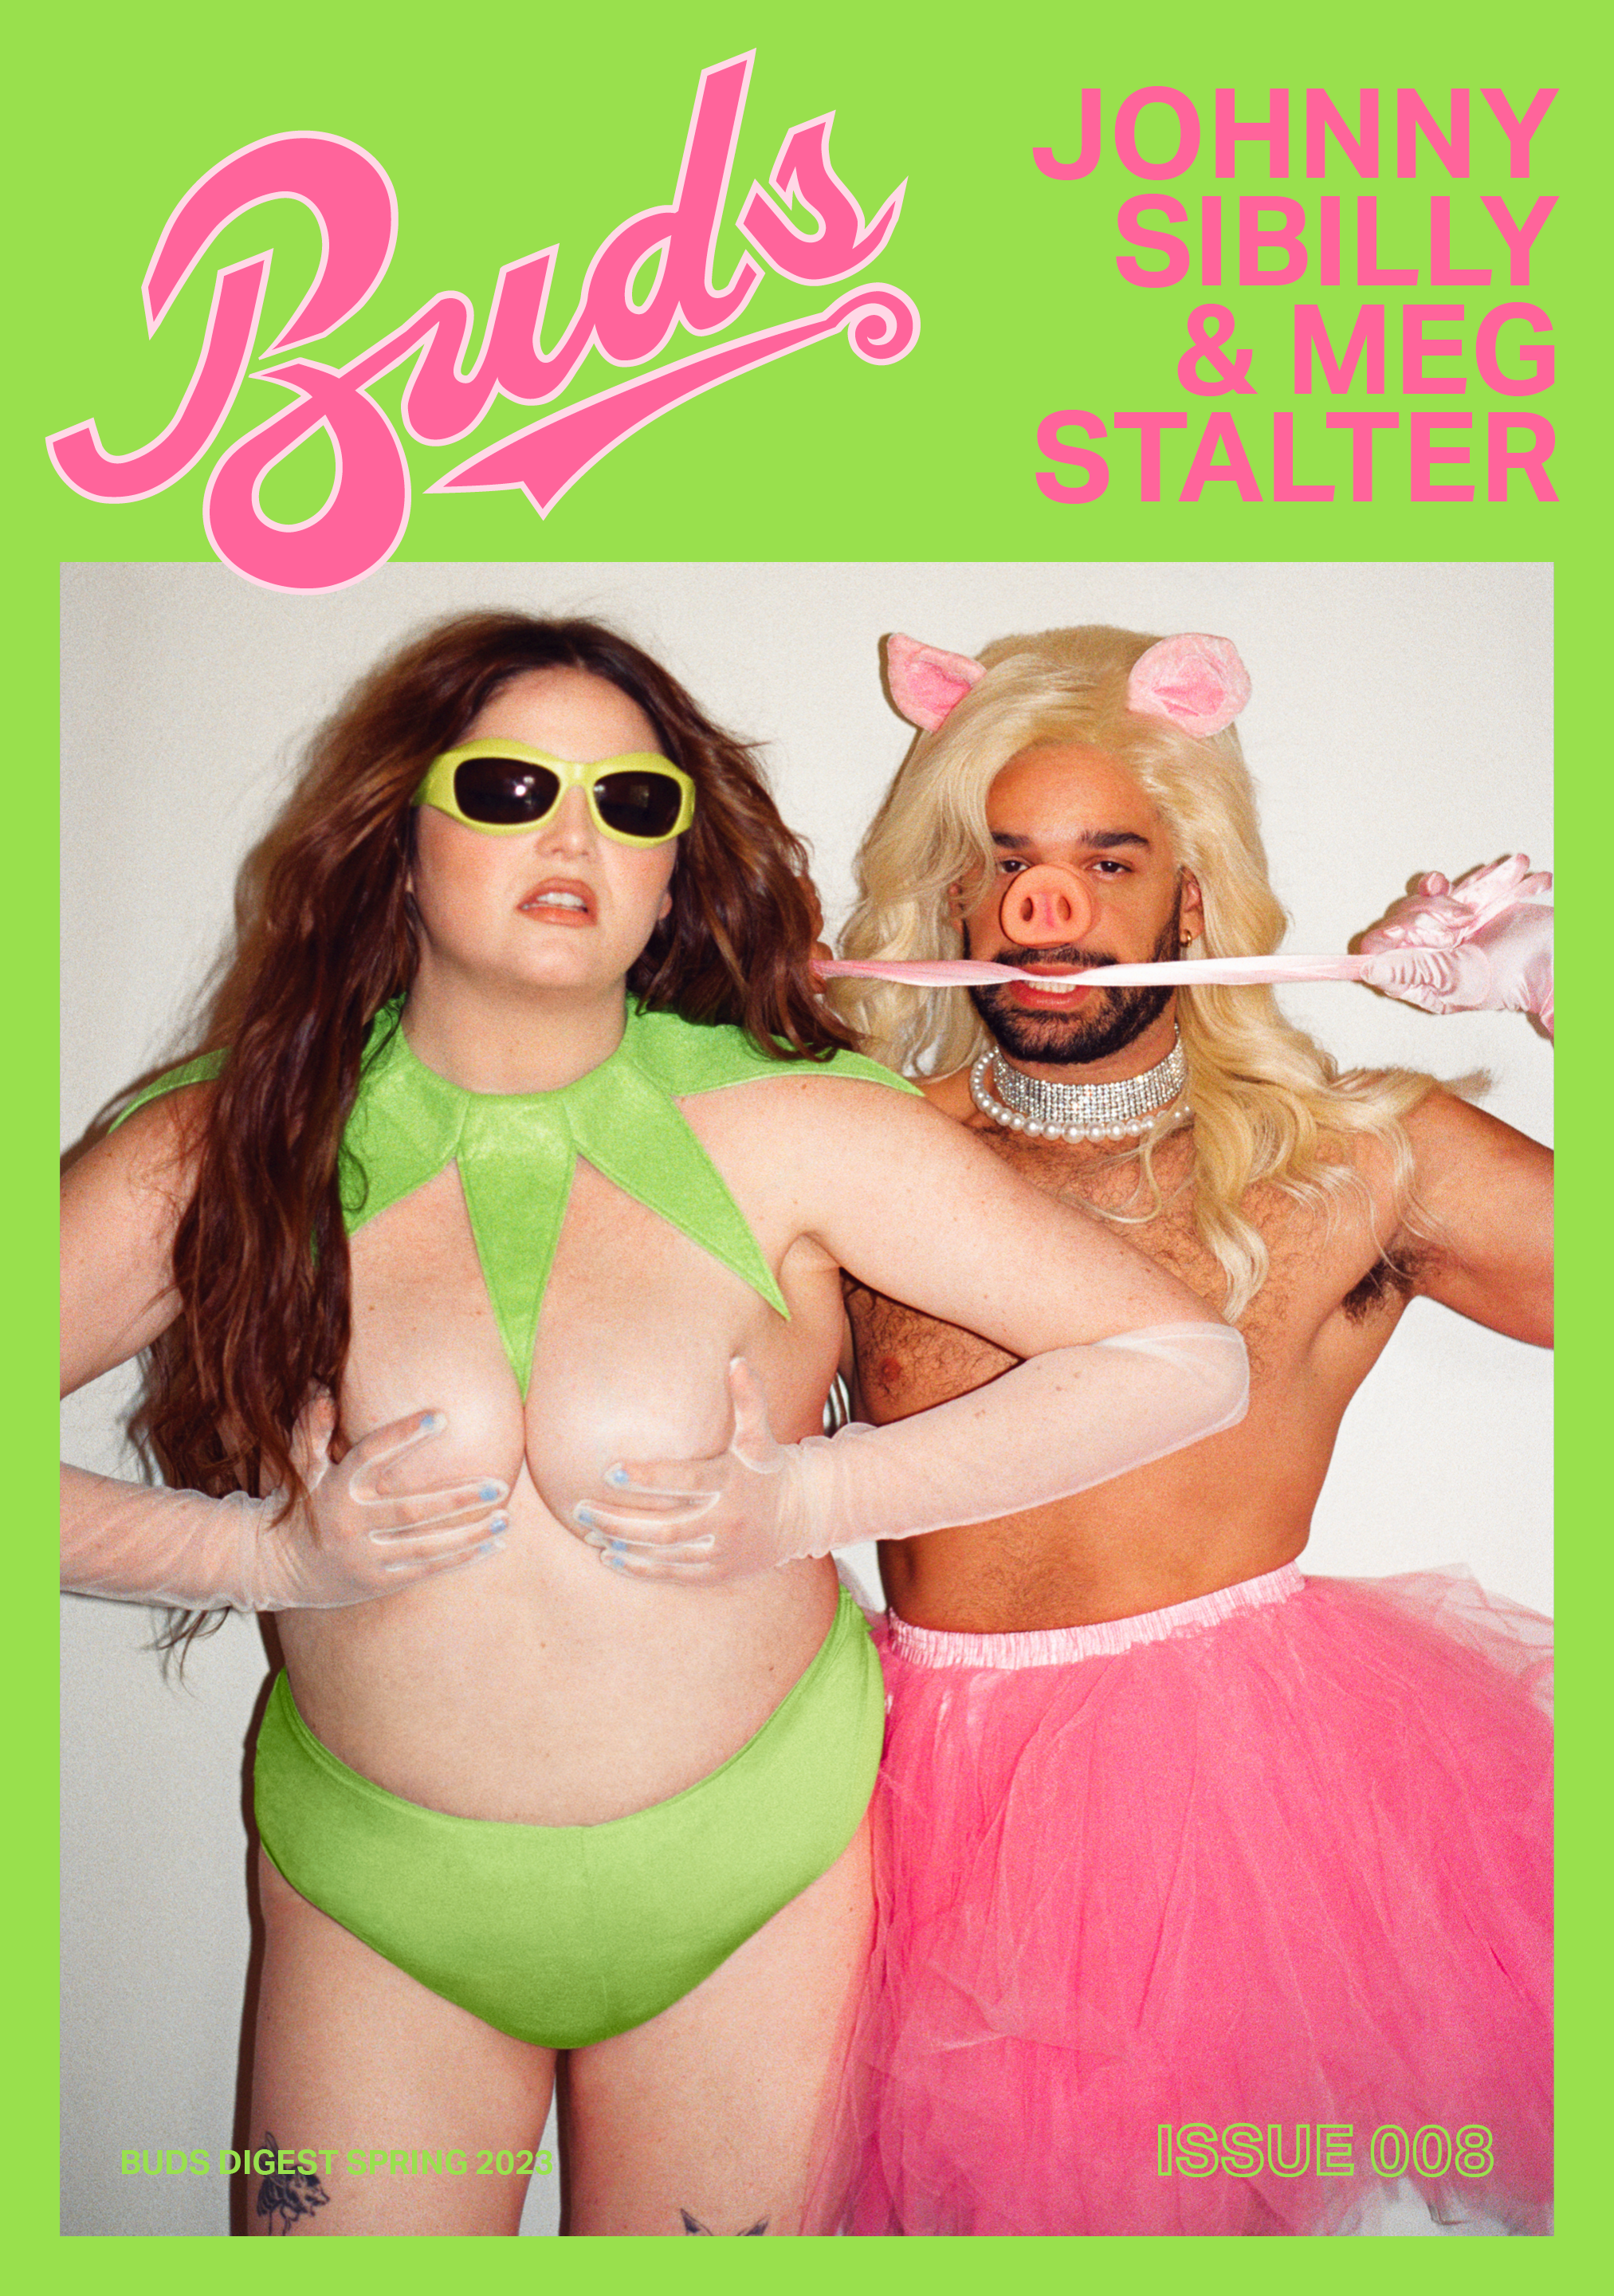 BUDS DIGEST ISSUE 008_COVERS 0420_SIBILLY & STALTER.png